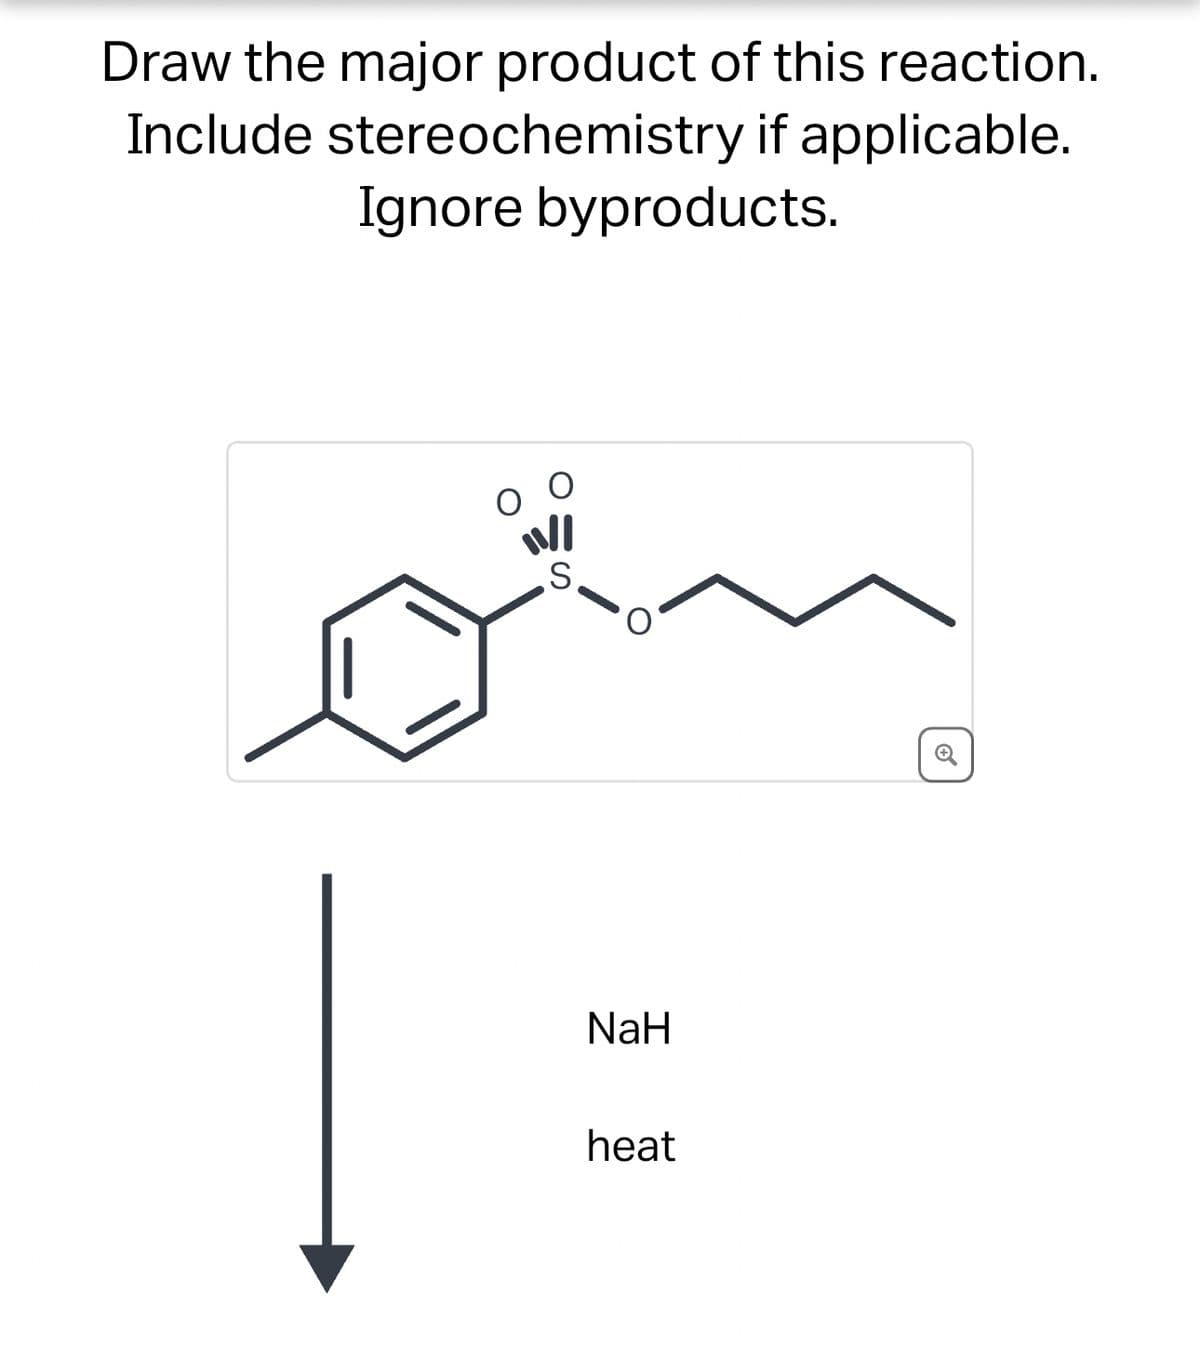 Draw the major product of this reaction.
Include stereochemistry if applicable.
Ignore byproducts.
S
NaH
heat